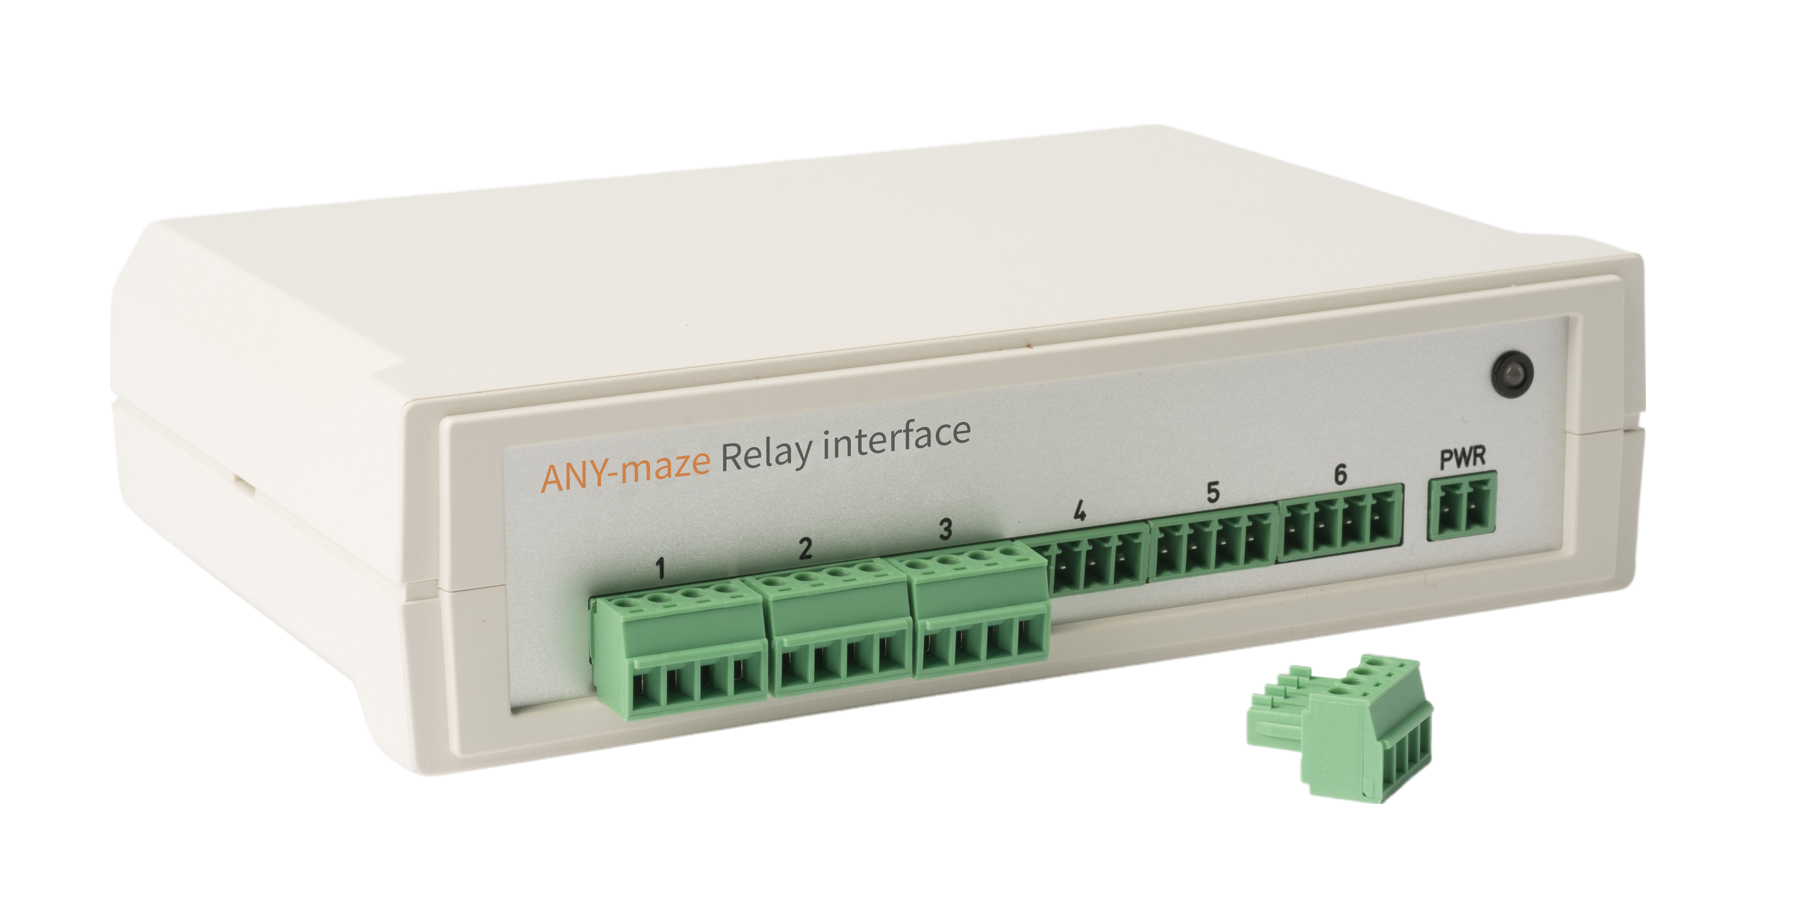 The ANY-maze Relay interface picture